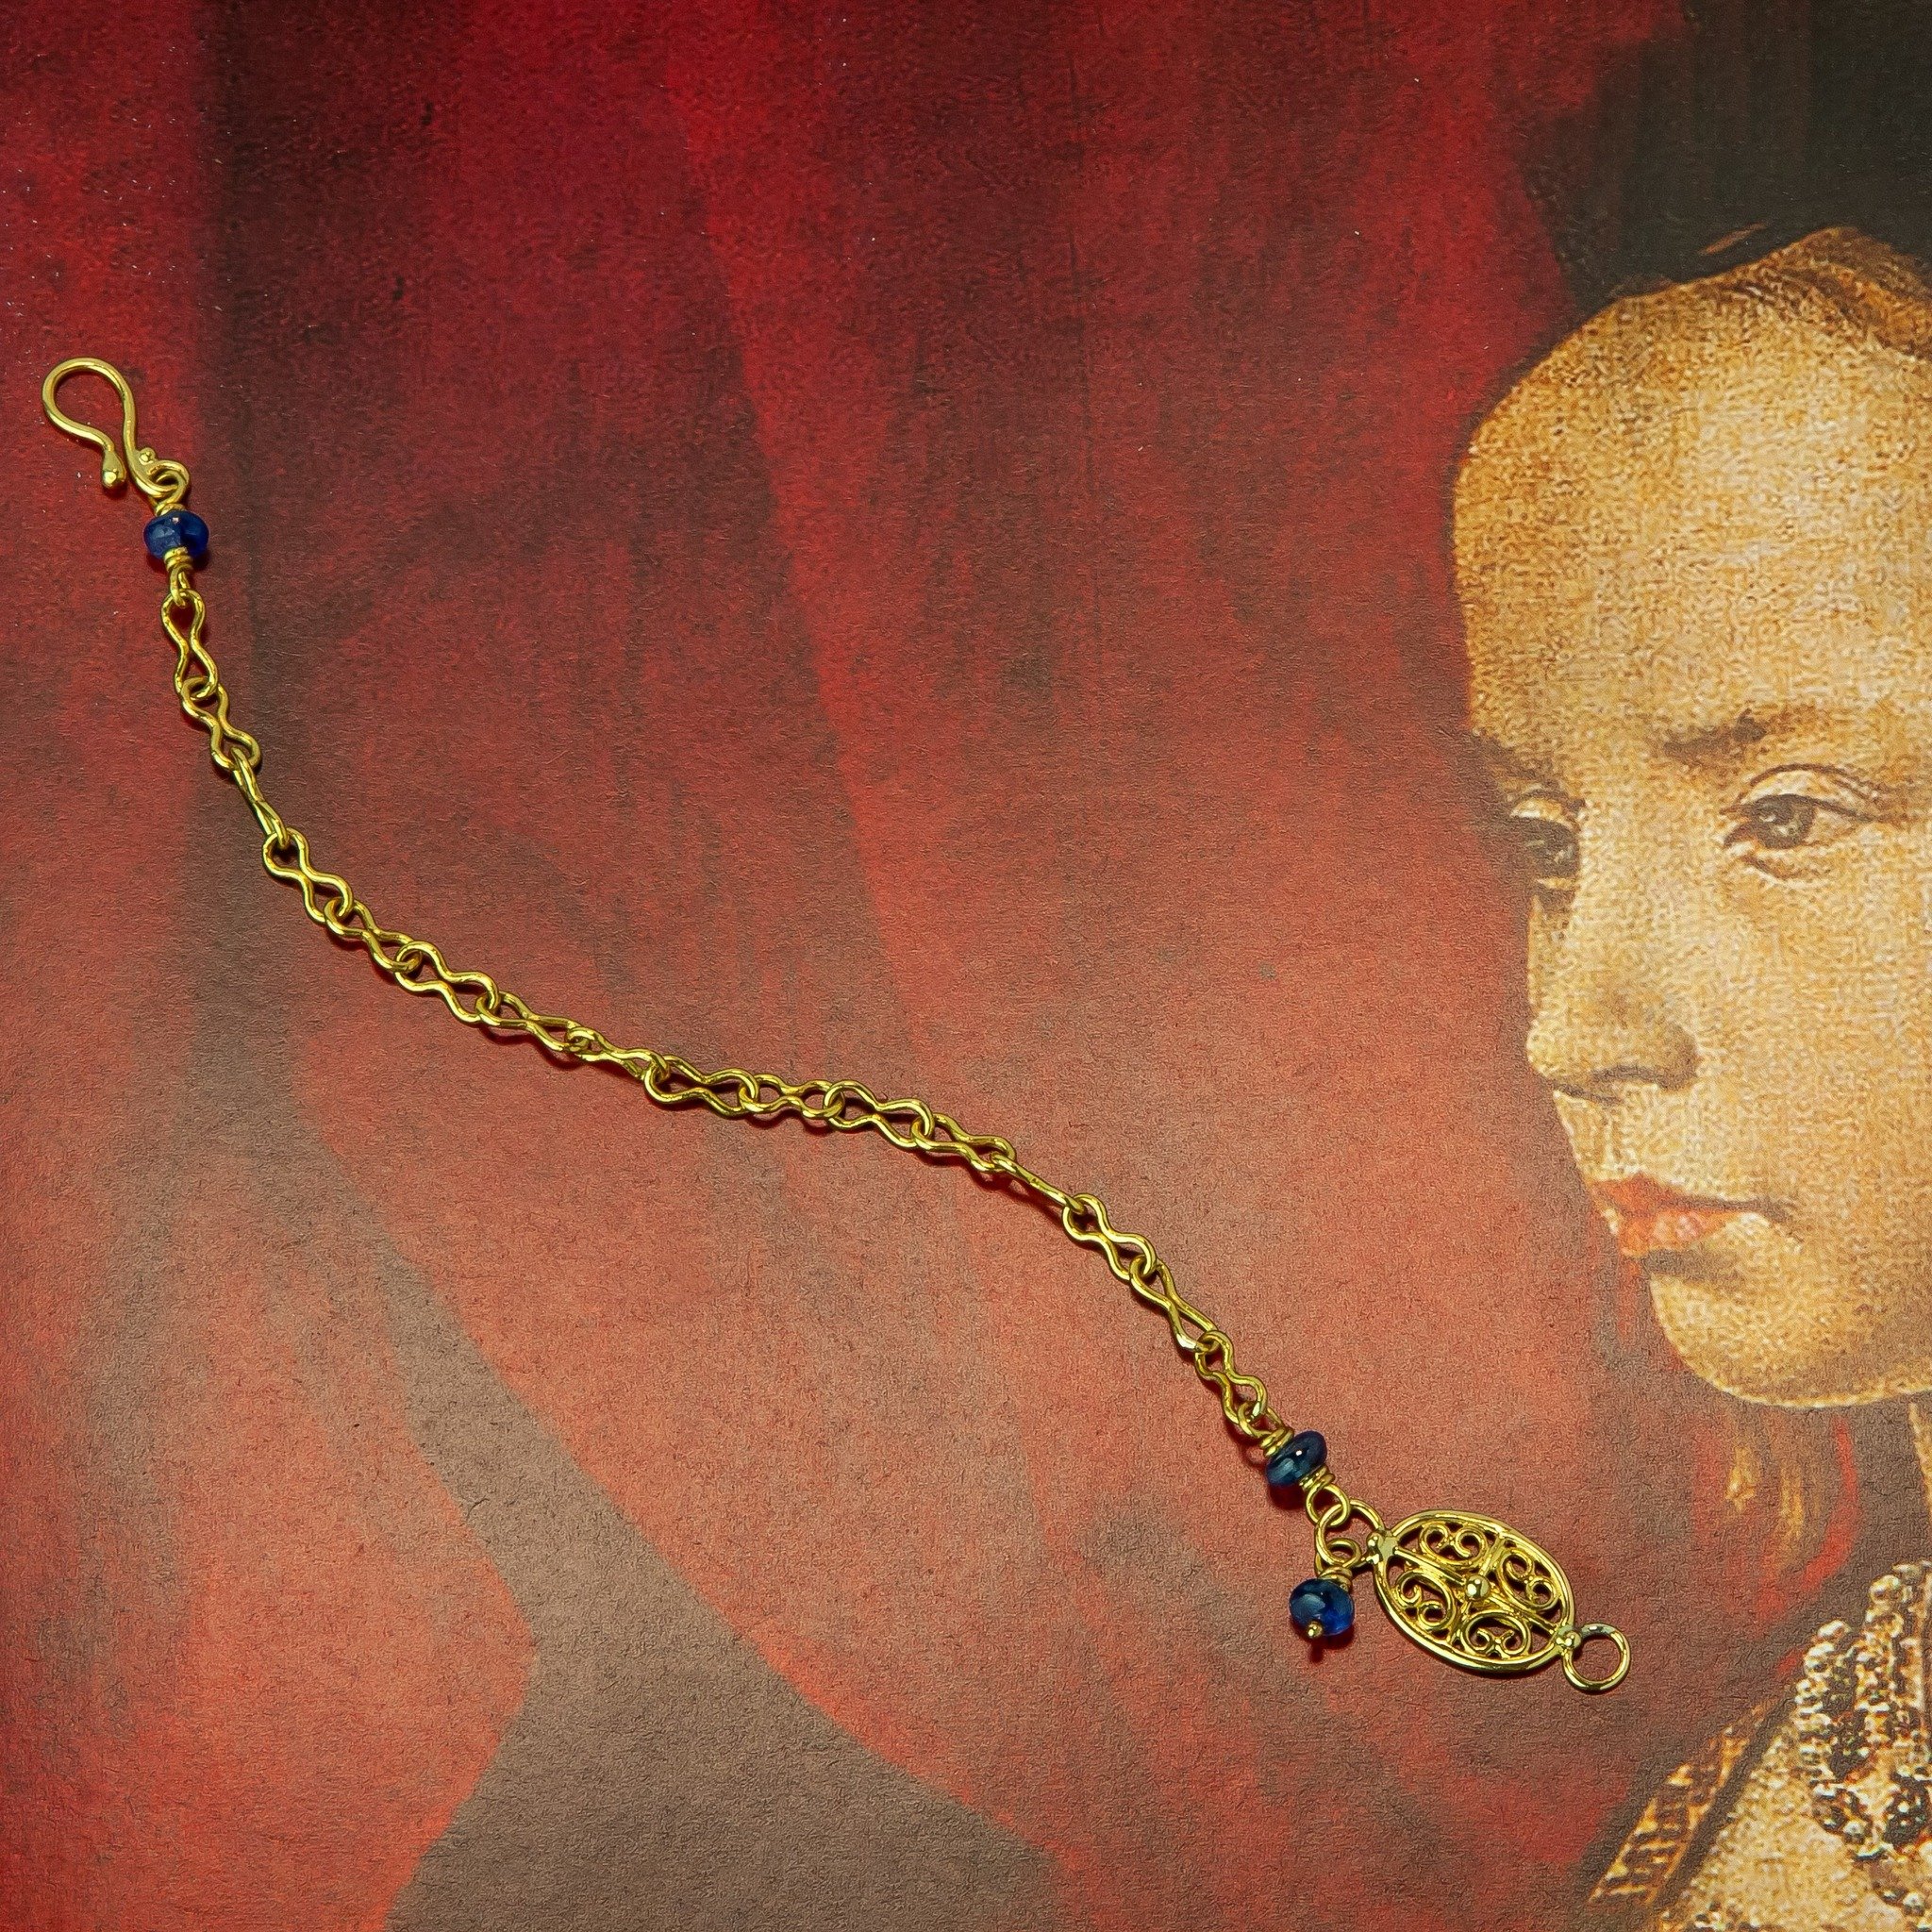 Blue sapphire and 22-karat gold bracelet handcrafted in NYC. Shown on a detail of the Portinari Altarpiece.